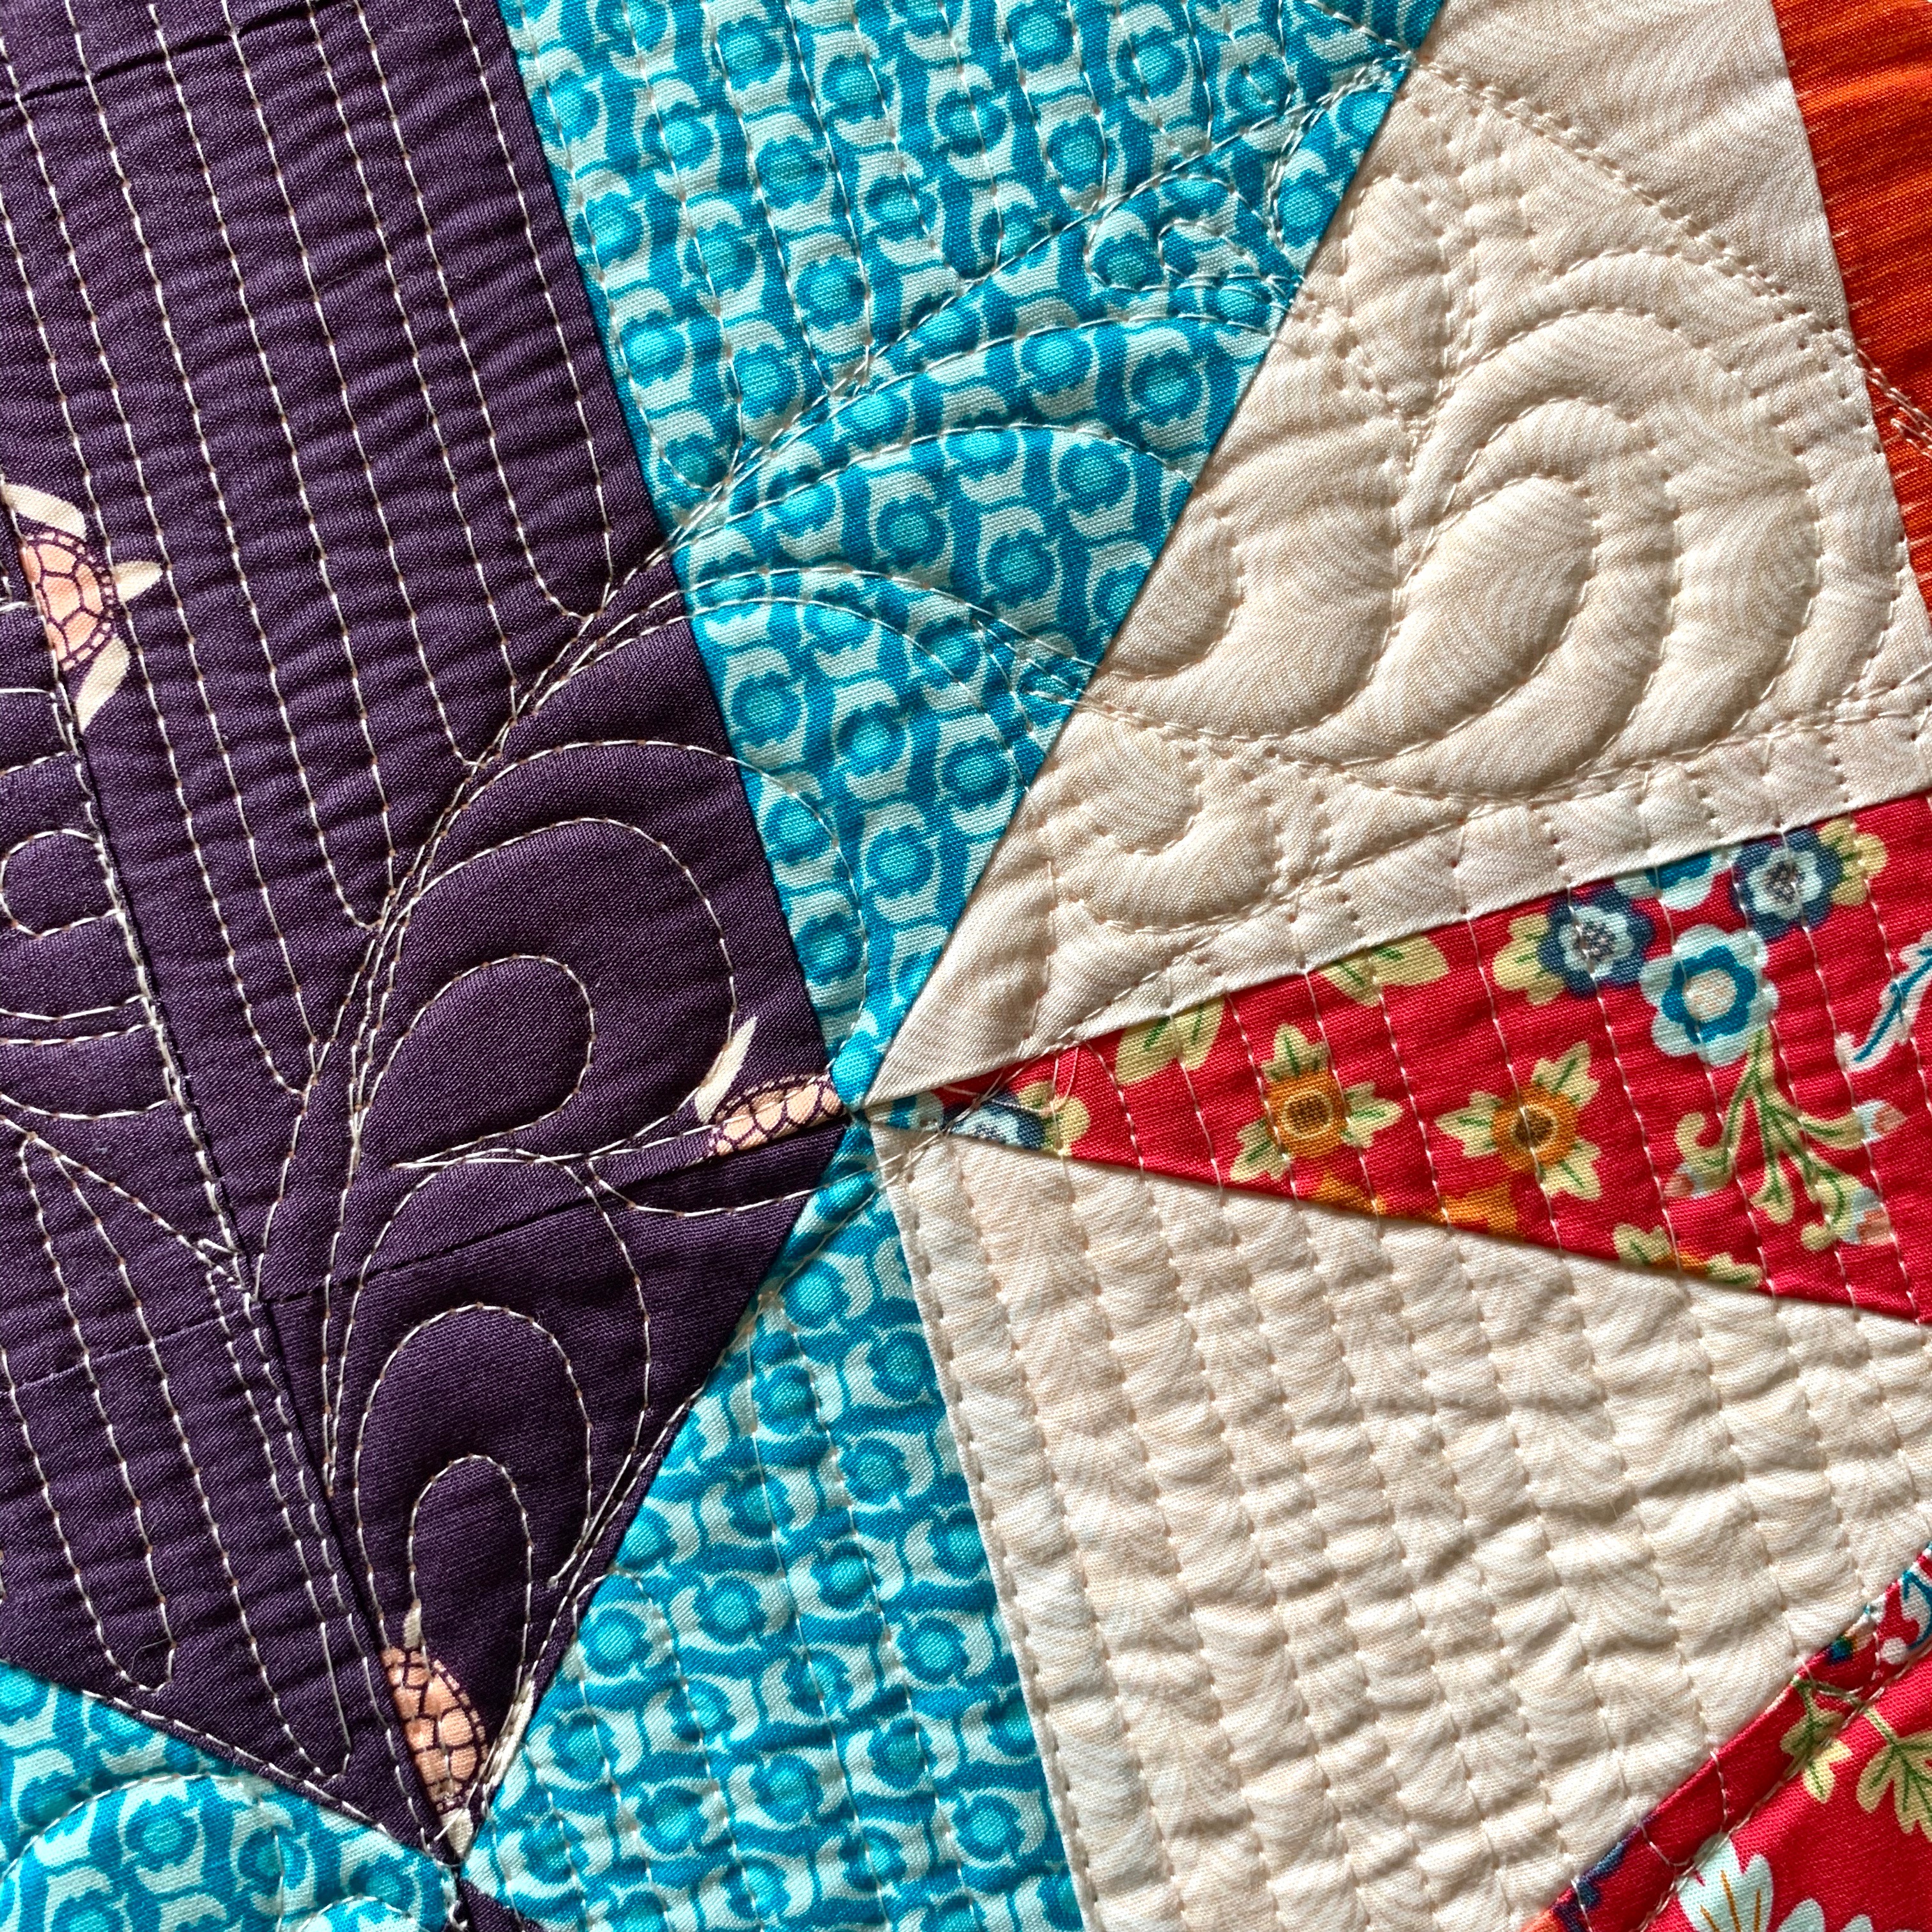 Do You Want to Learn to Free Motion Quilt?